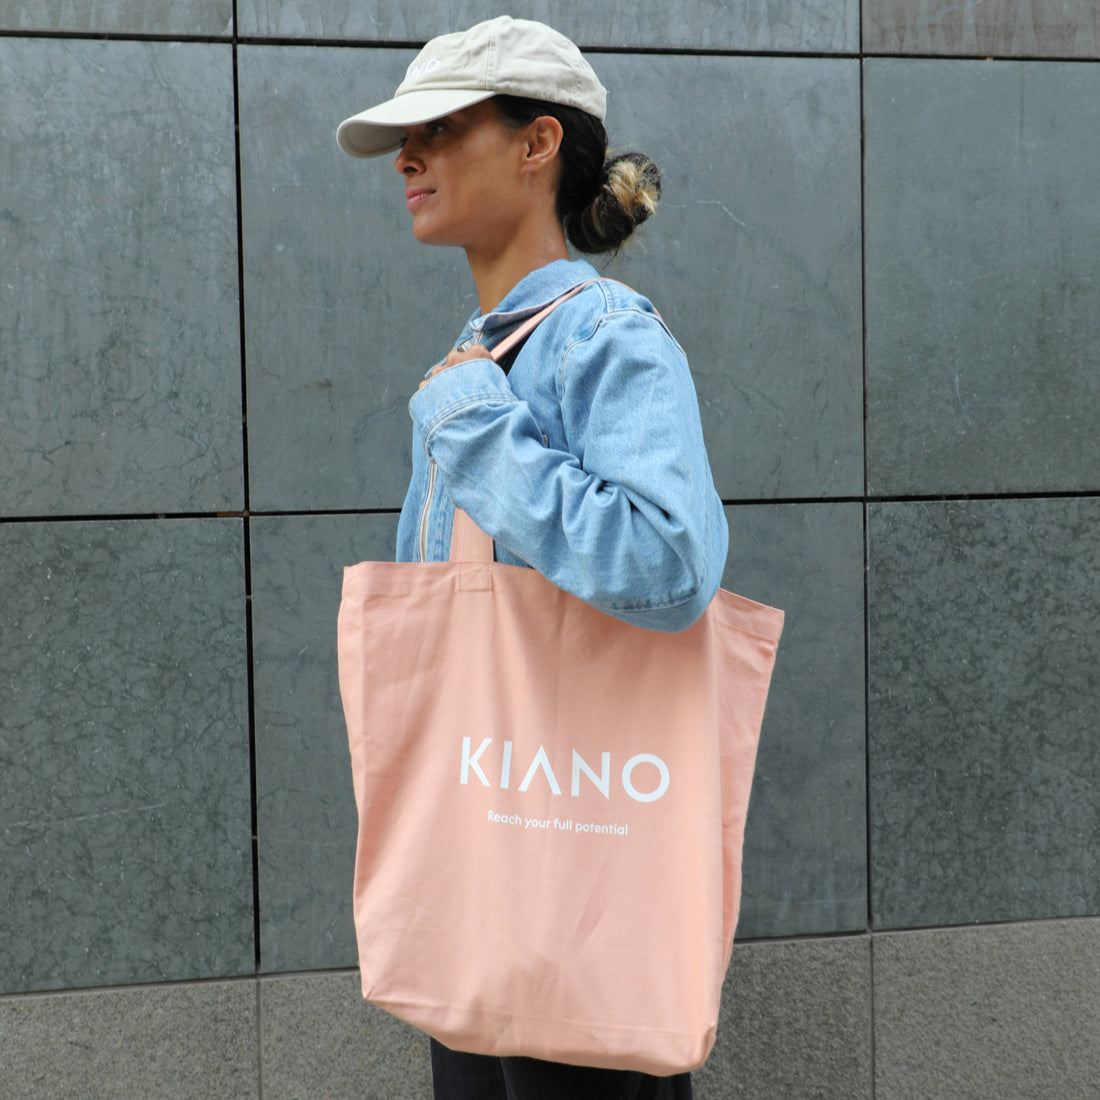 KIANO's Versatile Tote Bag: A Chic and Practical Choice for On-the-Go Lifestyles